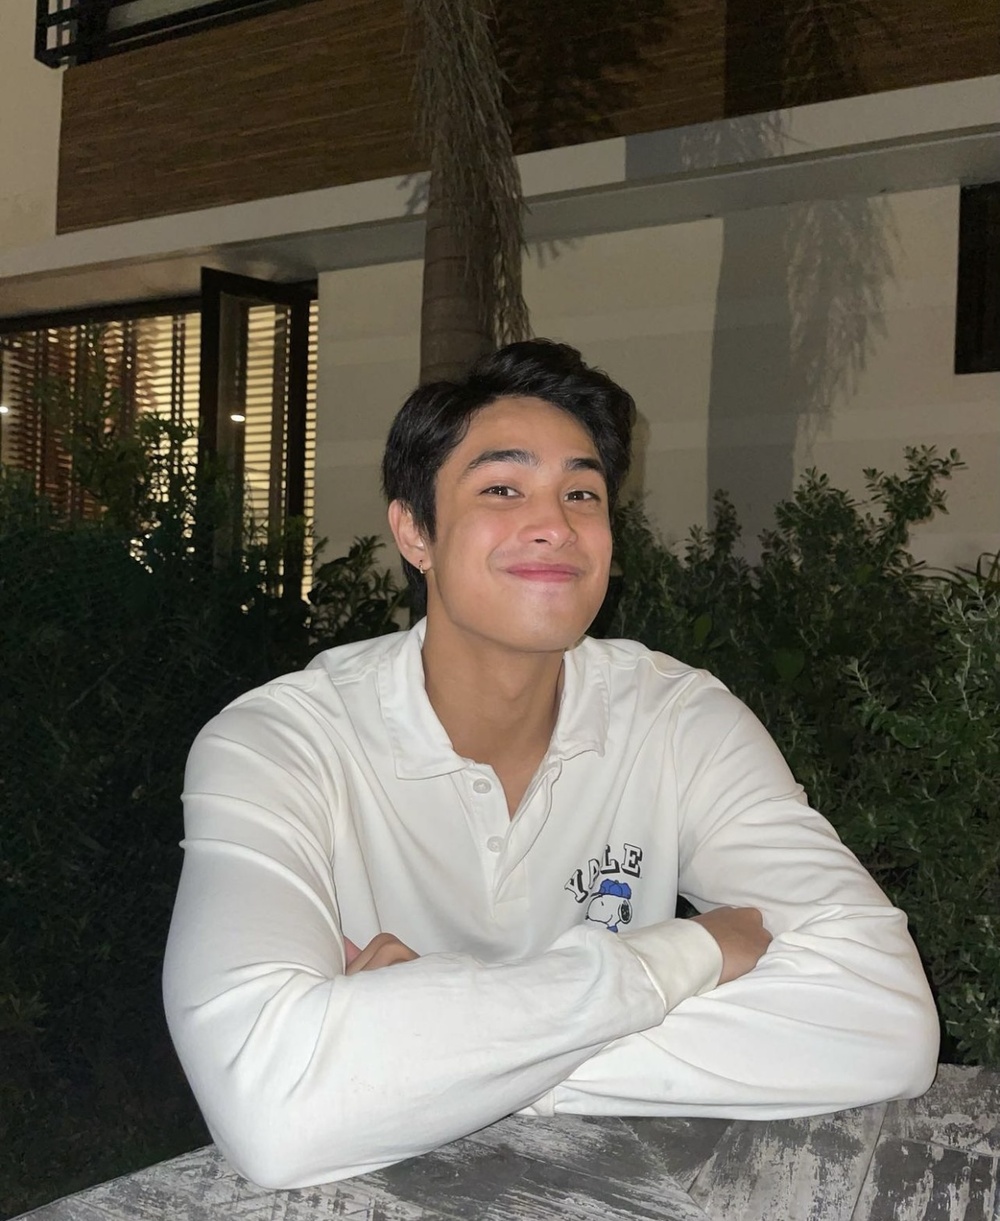 QuickFX brand ambassador Donny Pangilinan insecurity, beauty and skincare problems, pimples